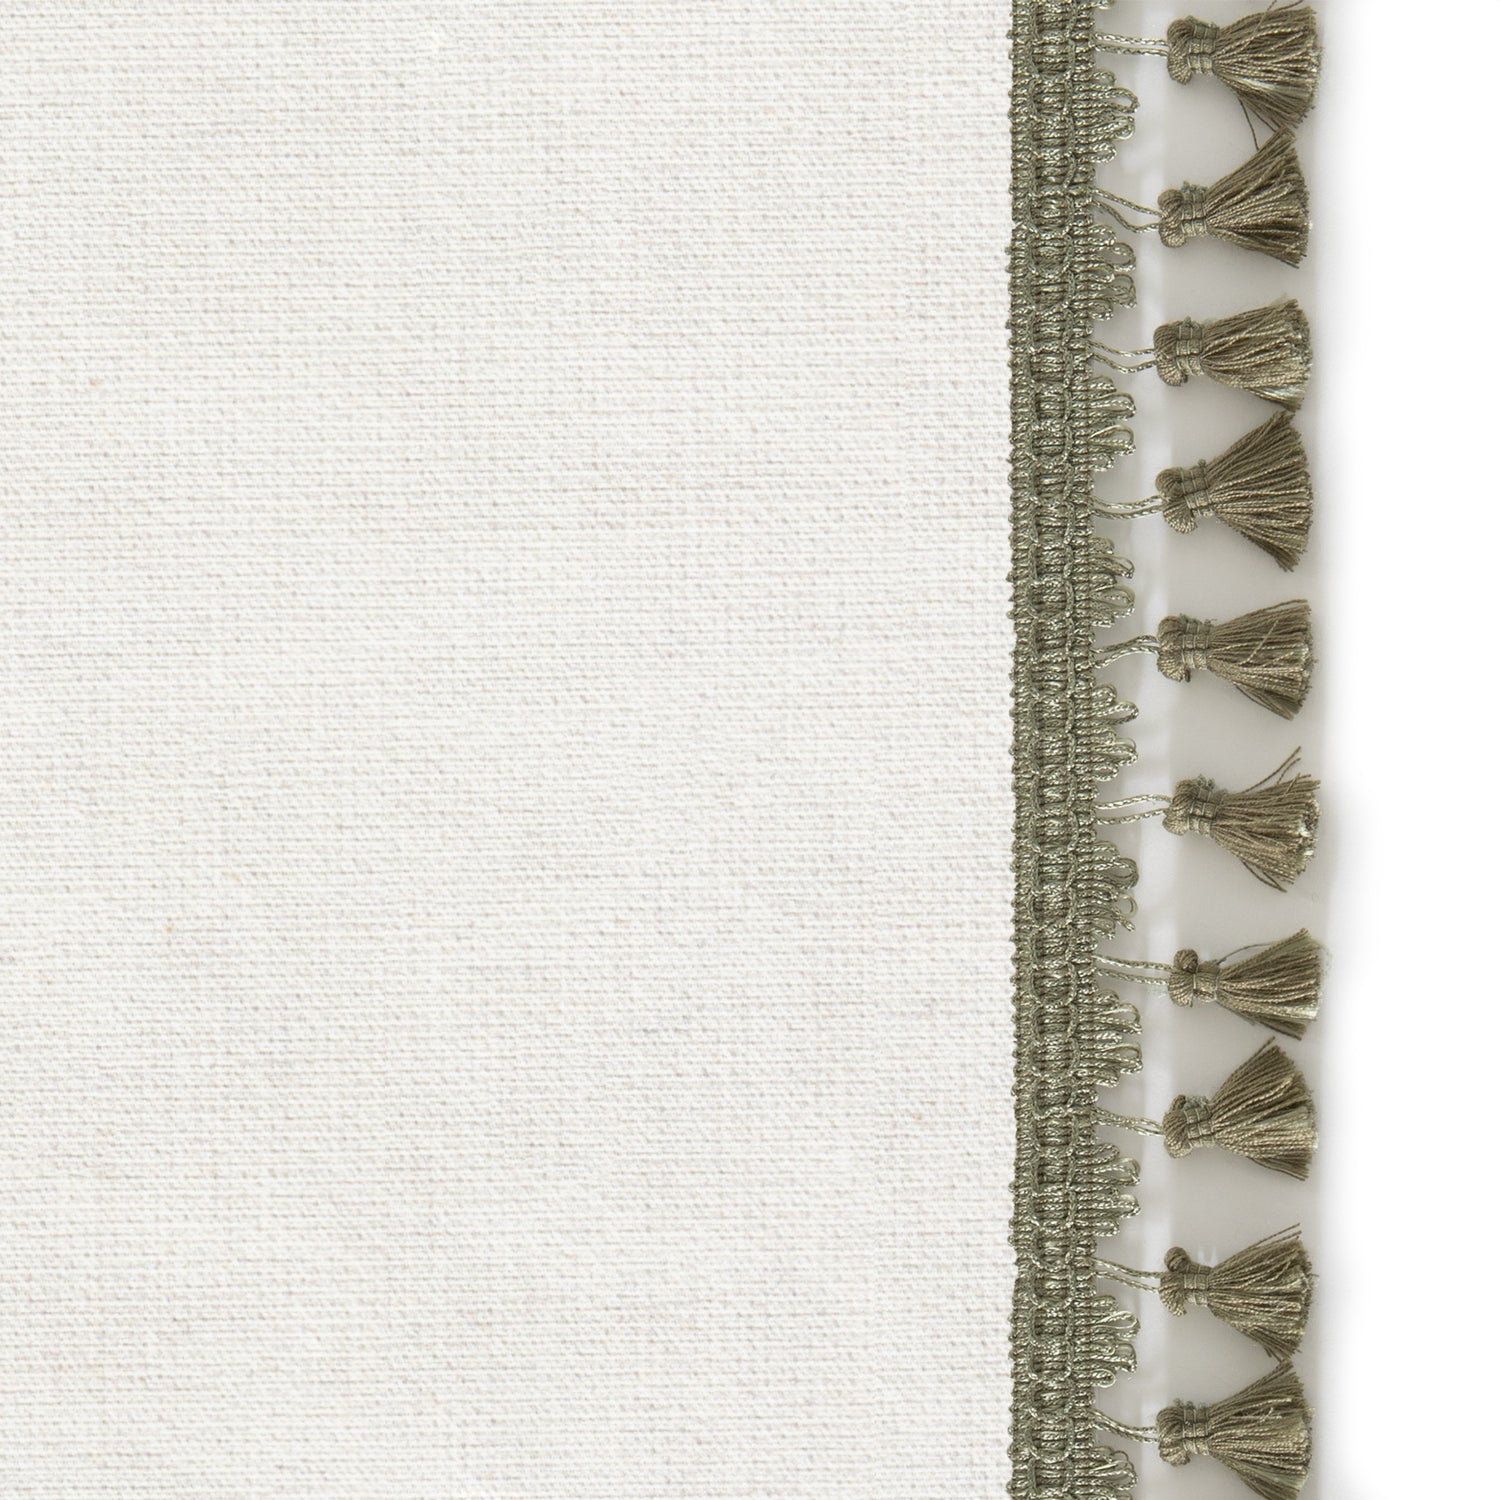 Upclose picture of Flour custom shower curtain with sage tassel trim